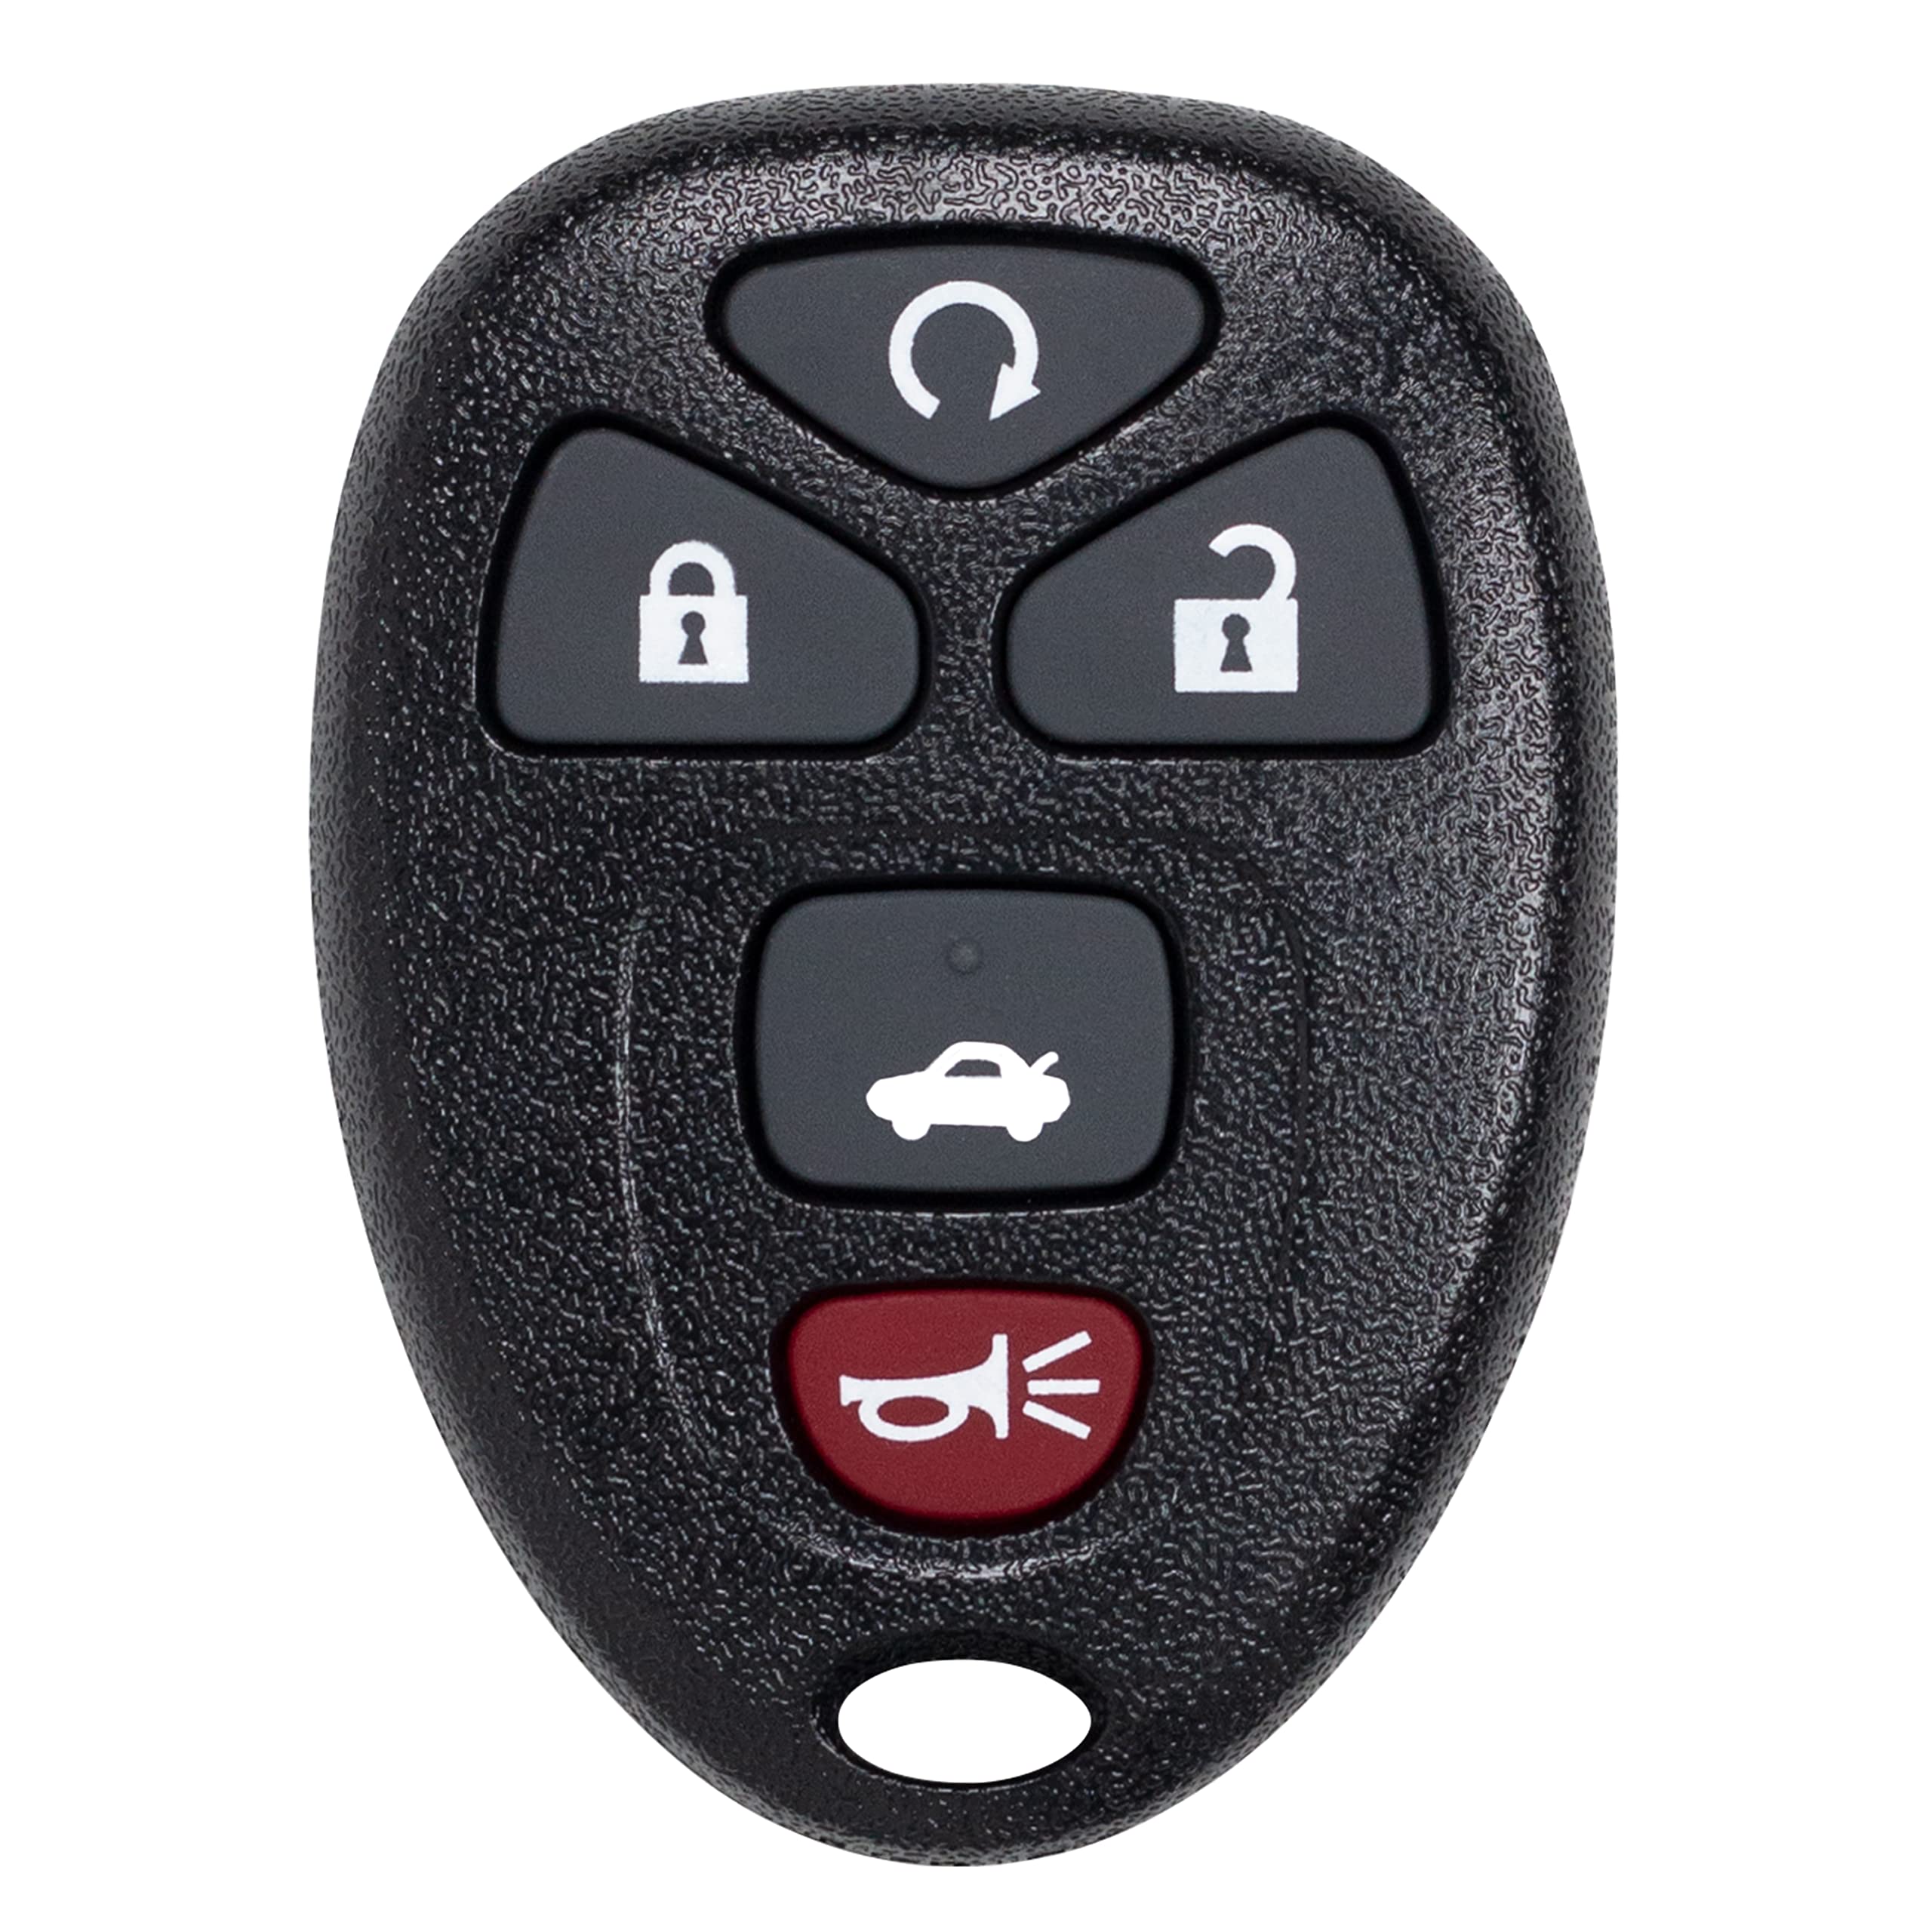 New Keyless Entry Remote Key Fob Transmitter OUC60270 OUC60221 for Chevrolet Lucerne DTS Impala Impala Monte Carlo Enclave Escalade Equinox Suburban Tahoe Traverse Acadia Yukon Outlook 25839476 15913415 2295109